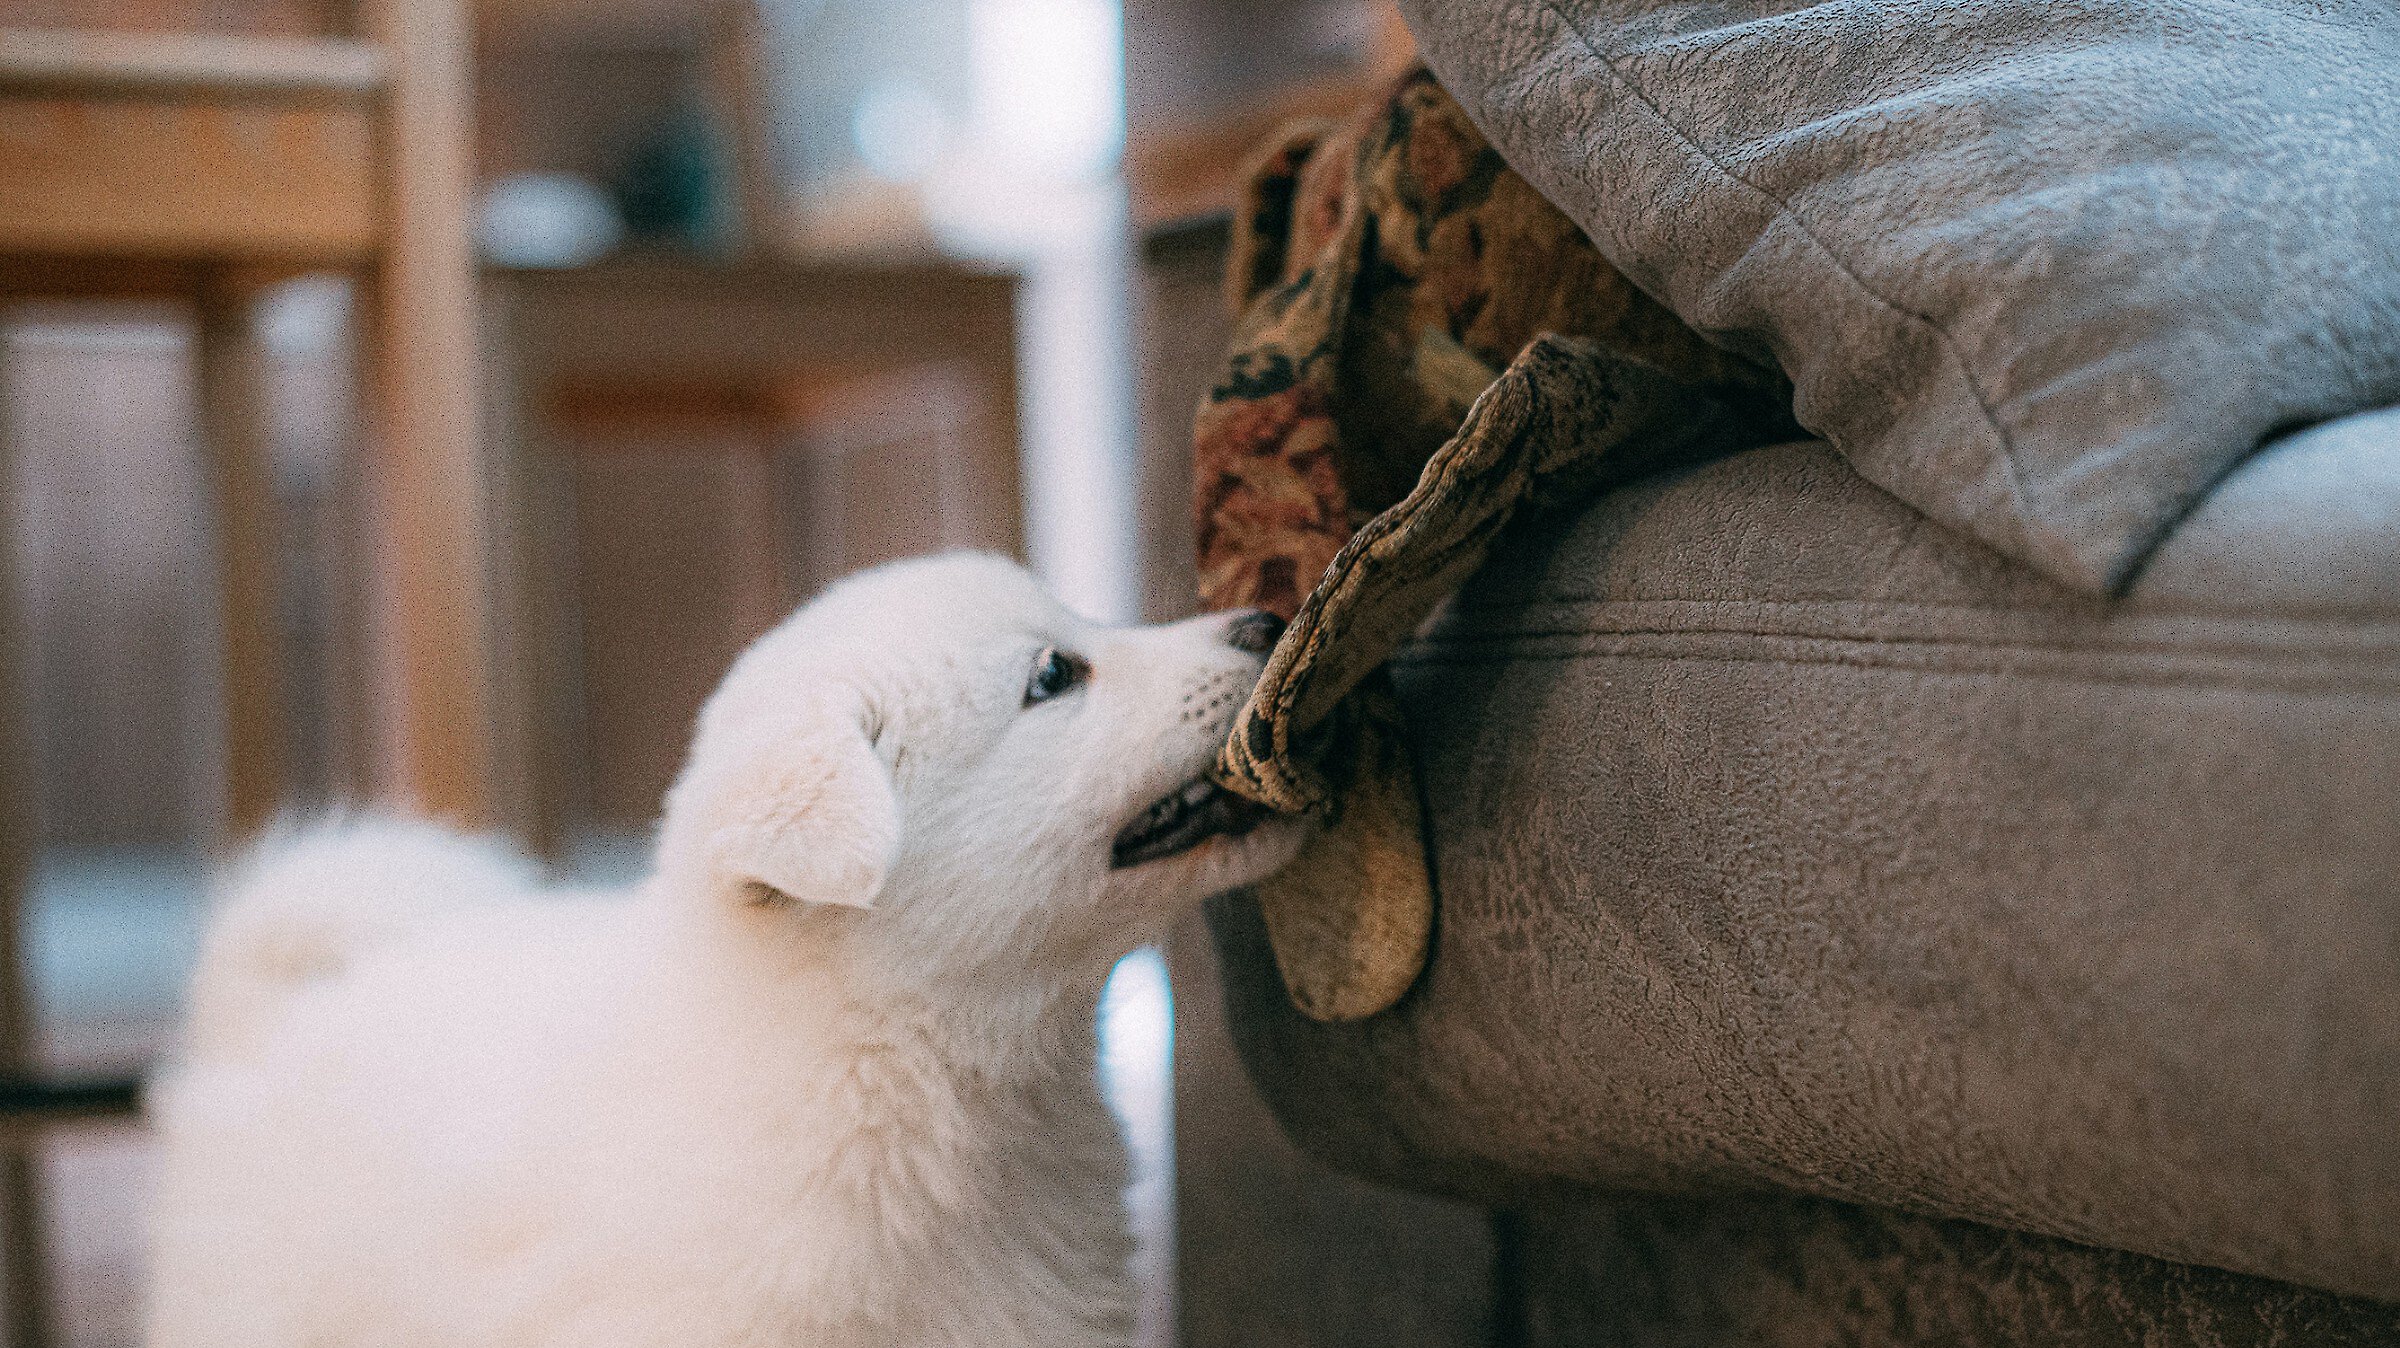 Puppy pulling blanket from the couch with his teeth